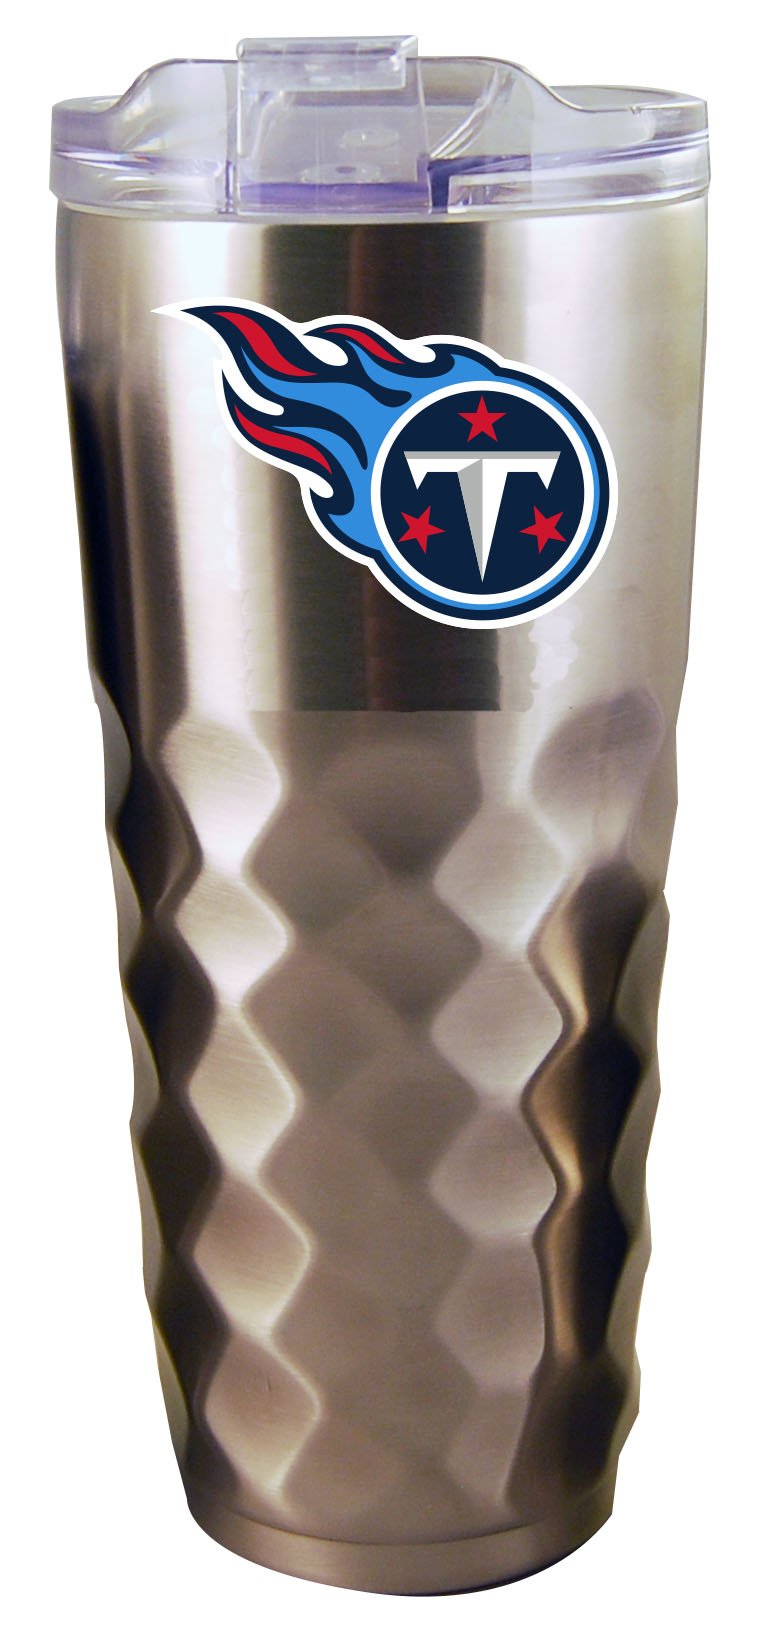 32oz Stainless Steel Diamond Tumbler | Tennessee Titans
CurrentProduct, Drinkware_category_All, NFL, Tennessee Titans, TTI
The Memory Company